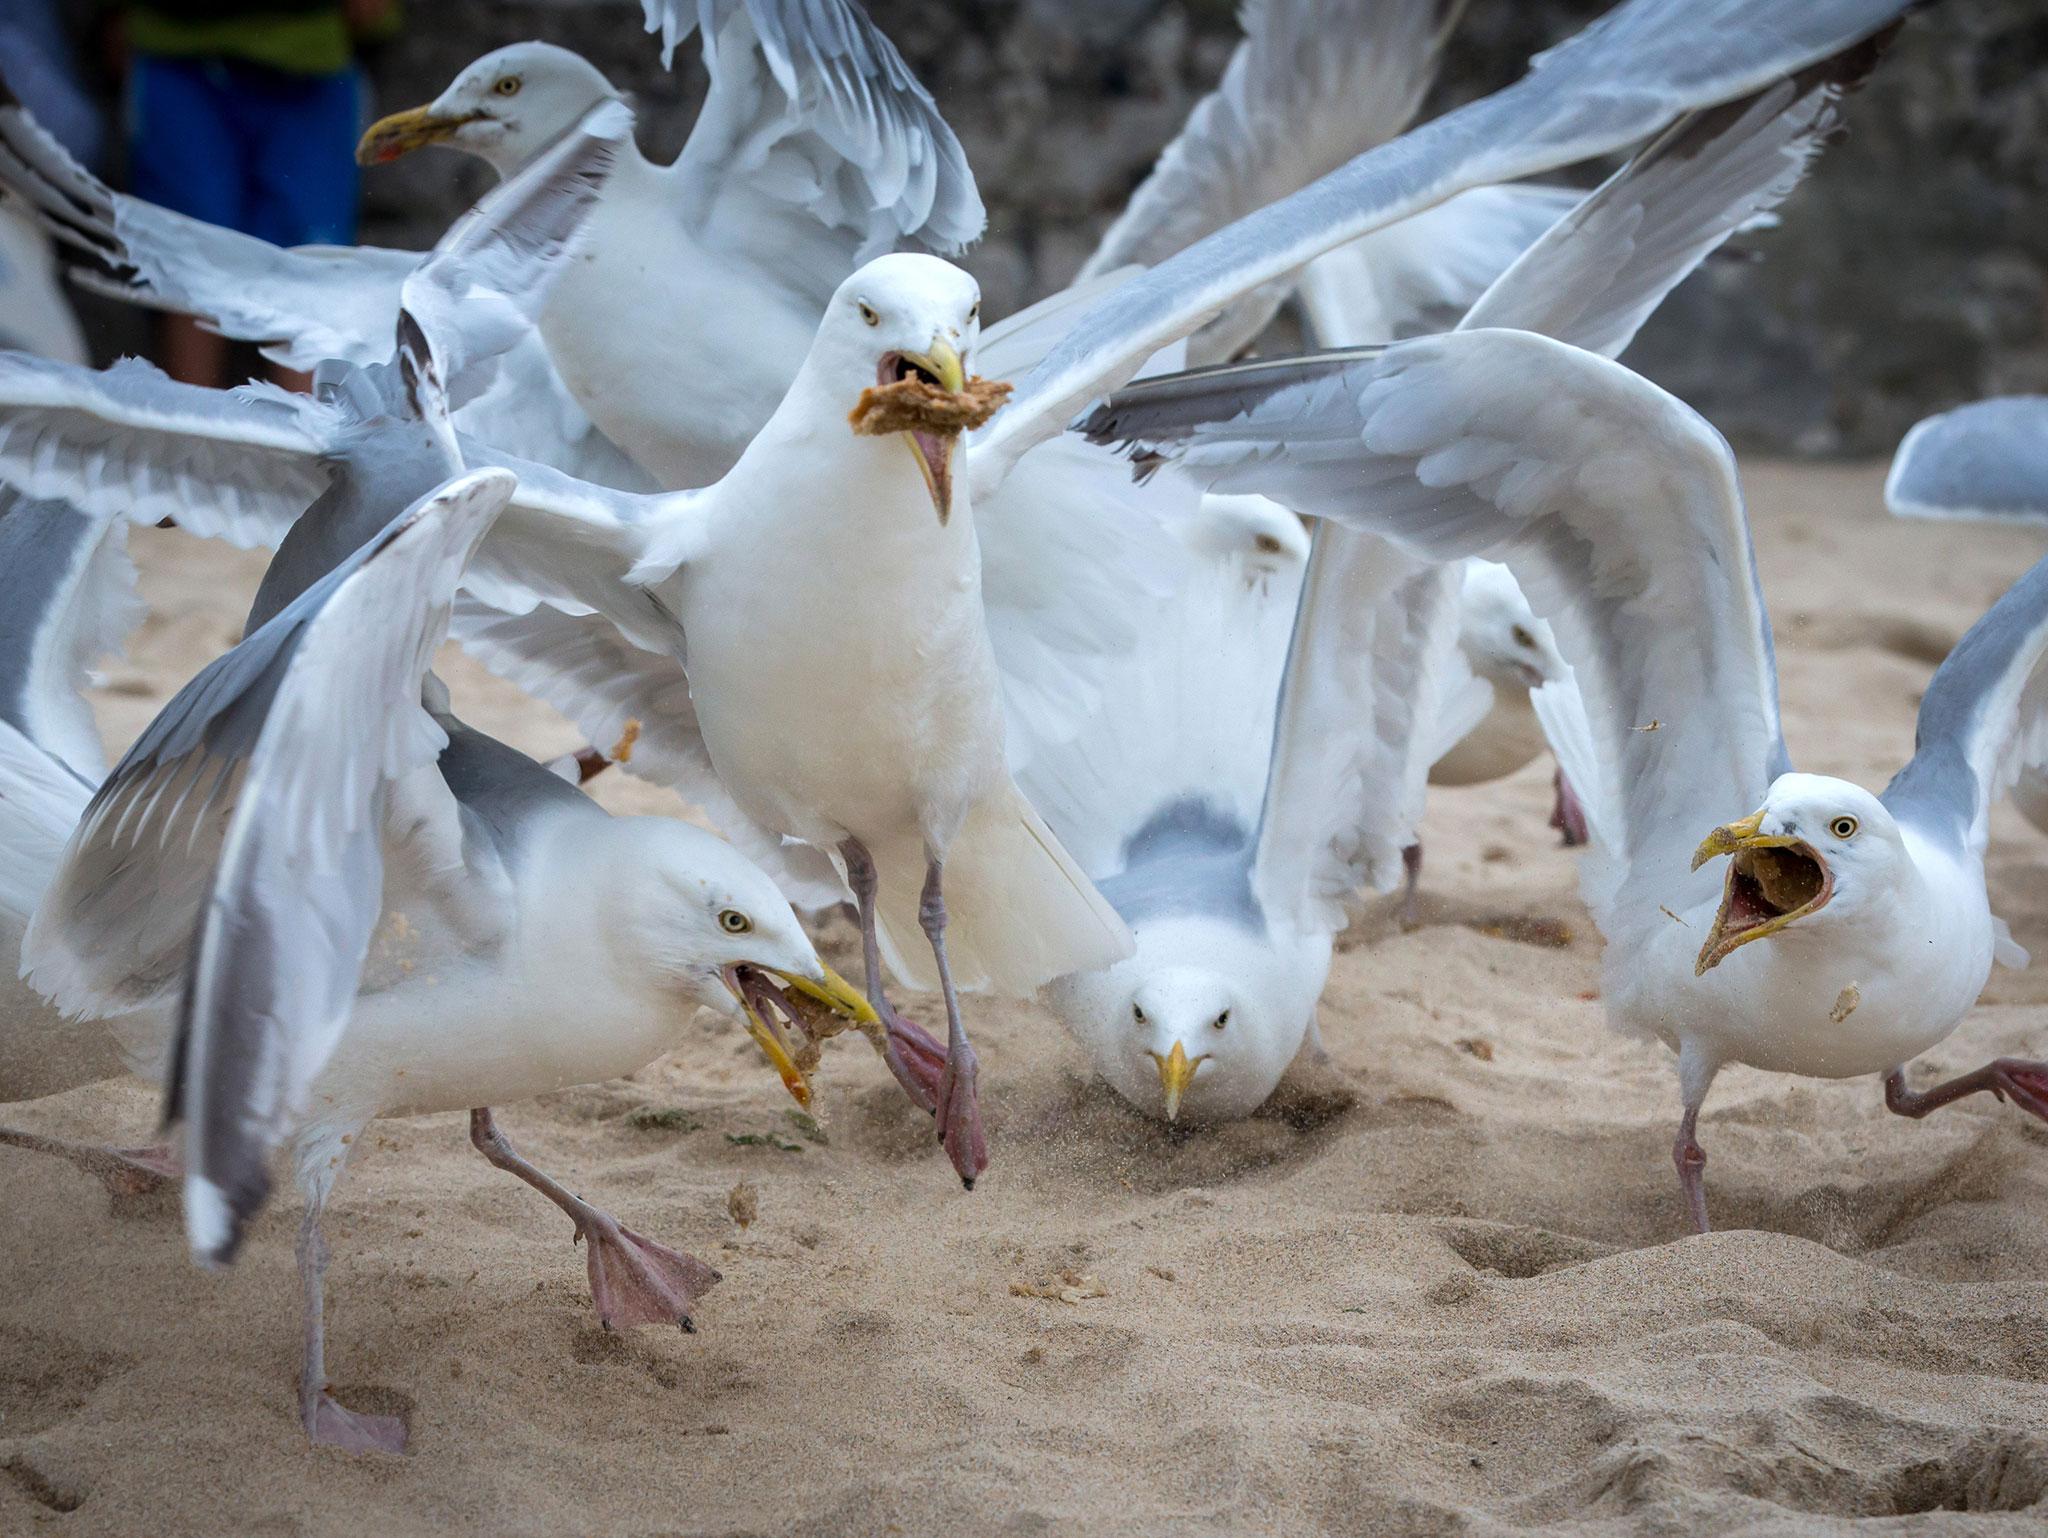 A pack of seagulls squabble over discarded food left on the beach at St Ives on July 28, 2015 